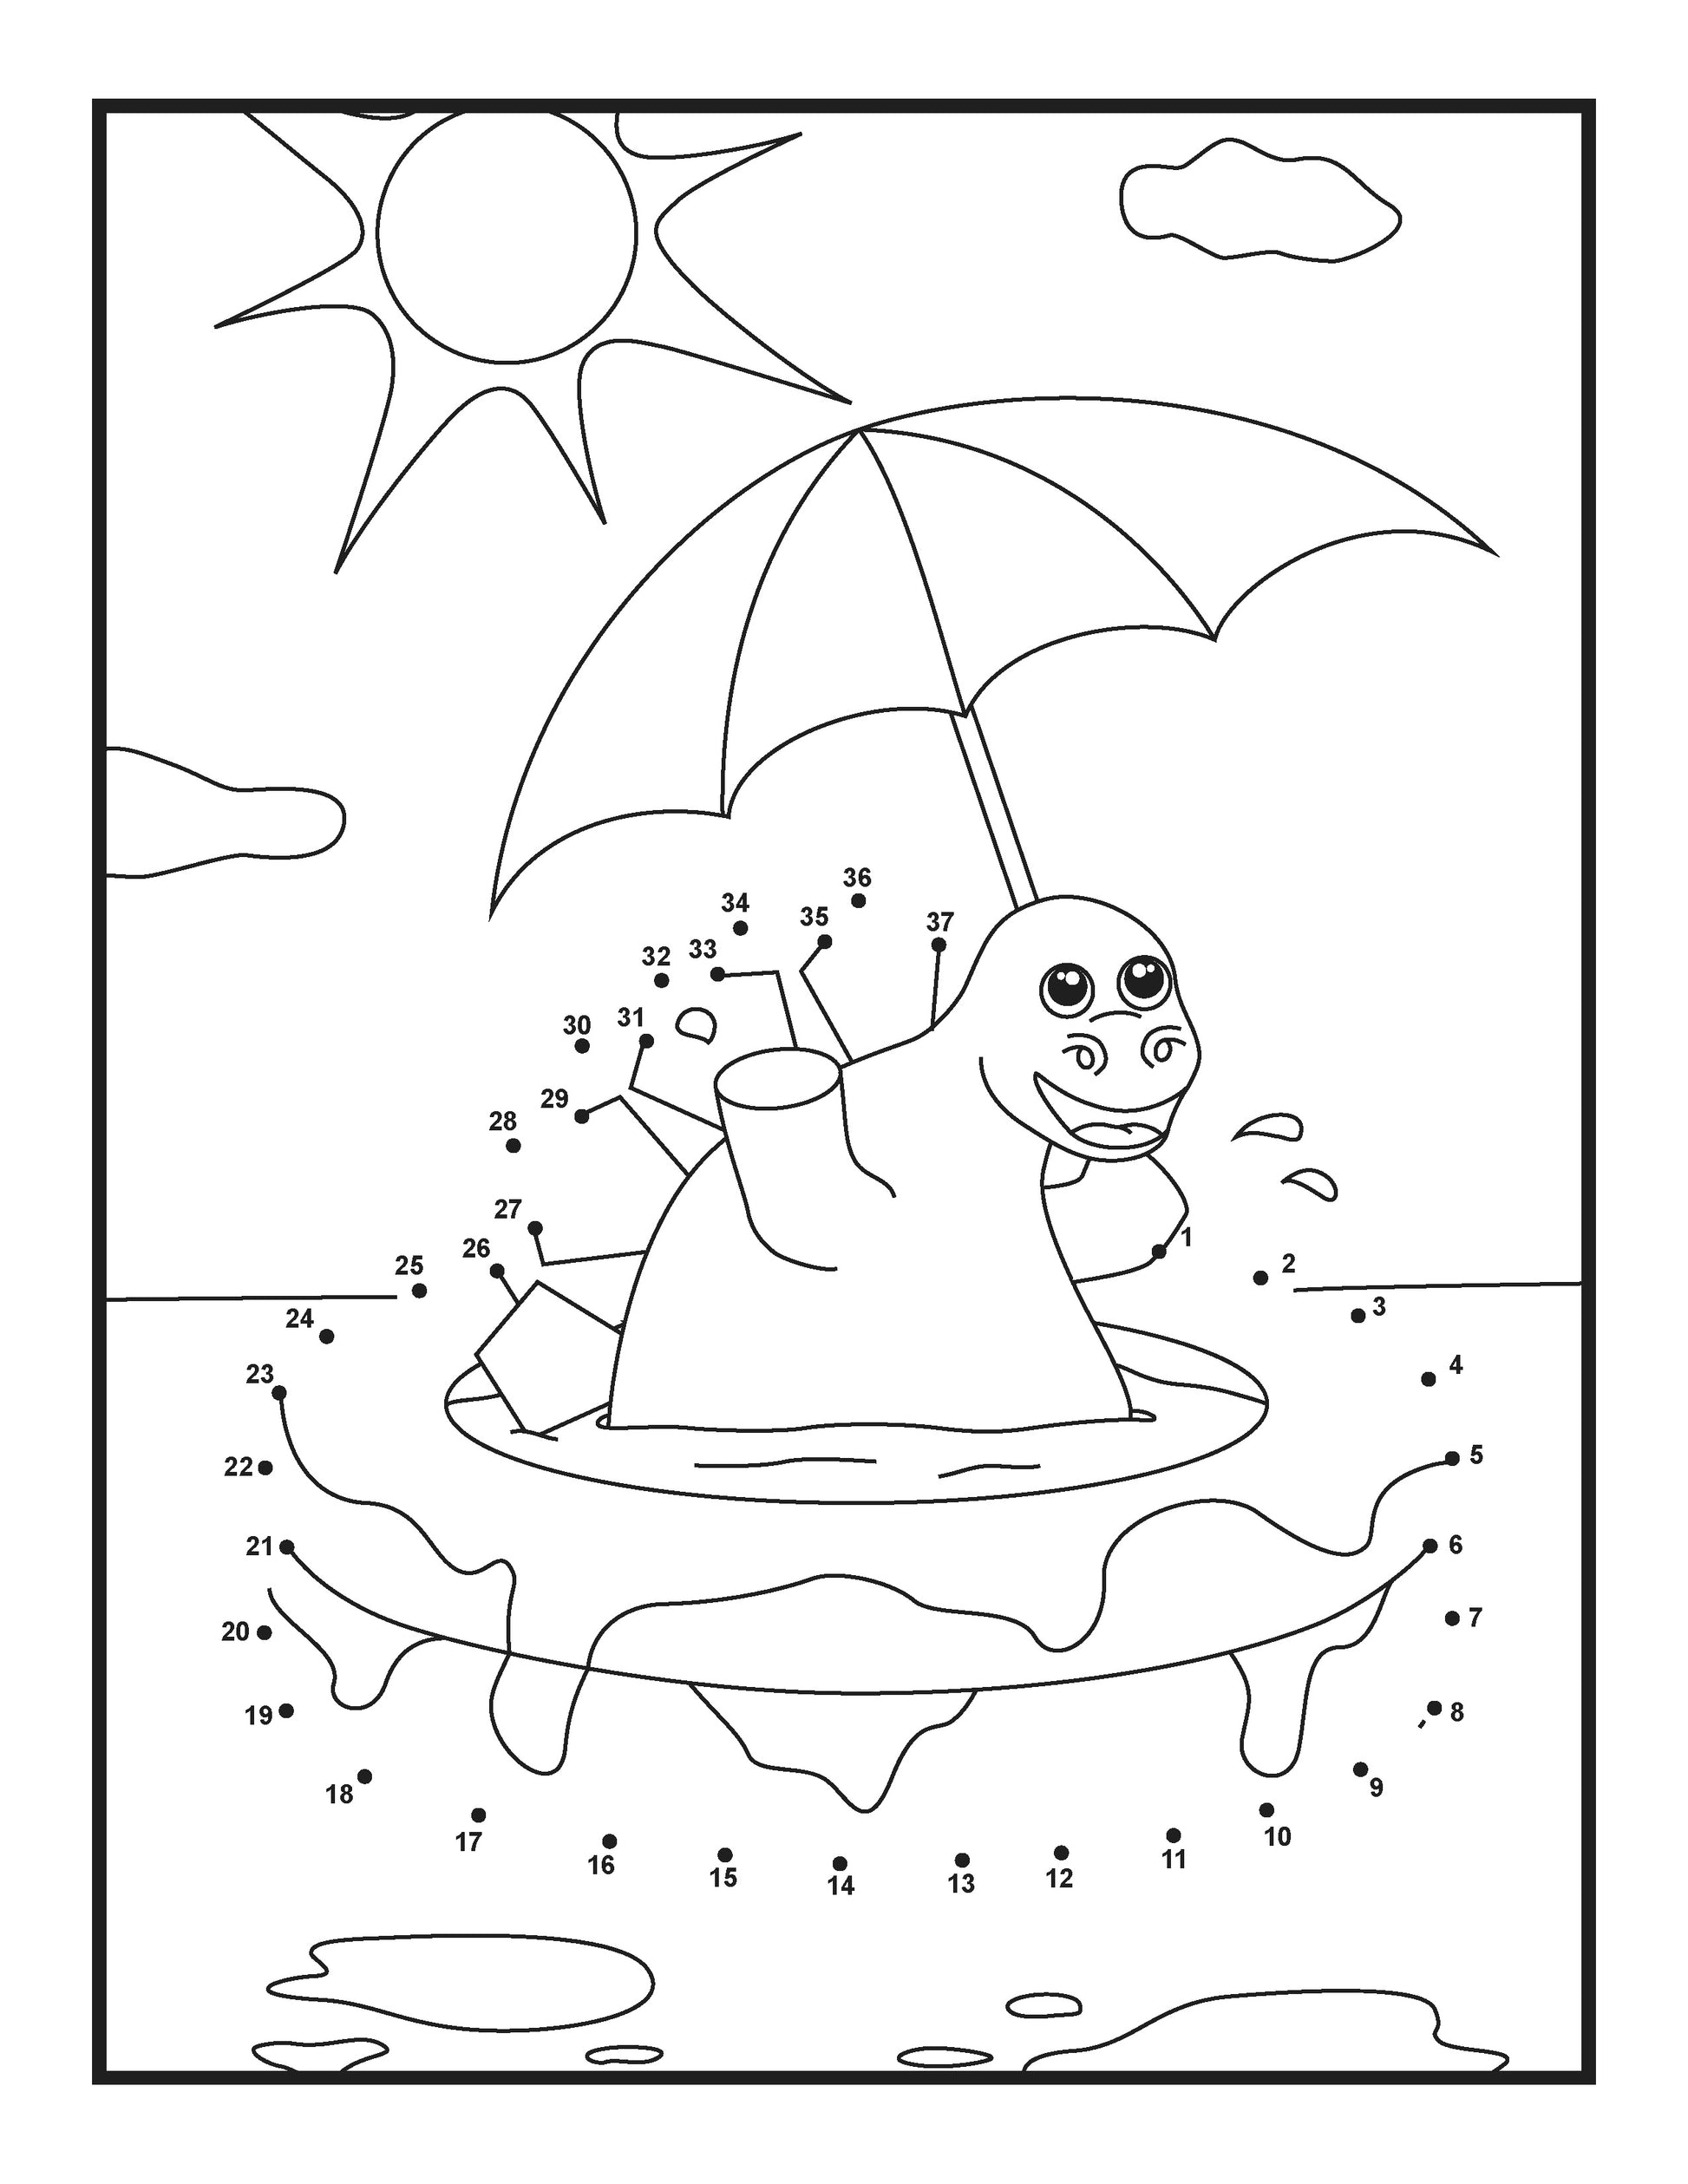 A children's connect-the-dots coloring page featuring a joyous dinosaur in a pool under an umbrella. The sun shines brightly above, with clouds scattered in the background. The dinosaur has a wide smile and is waving, promoting a fun and engaging learning activity. Numbered dots from 1 to 37 are to be connected to reveal the full image. The illustration combines elements of play and education, suitable for developing coordination and number recognition in a delightful summer setting.